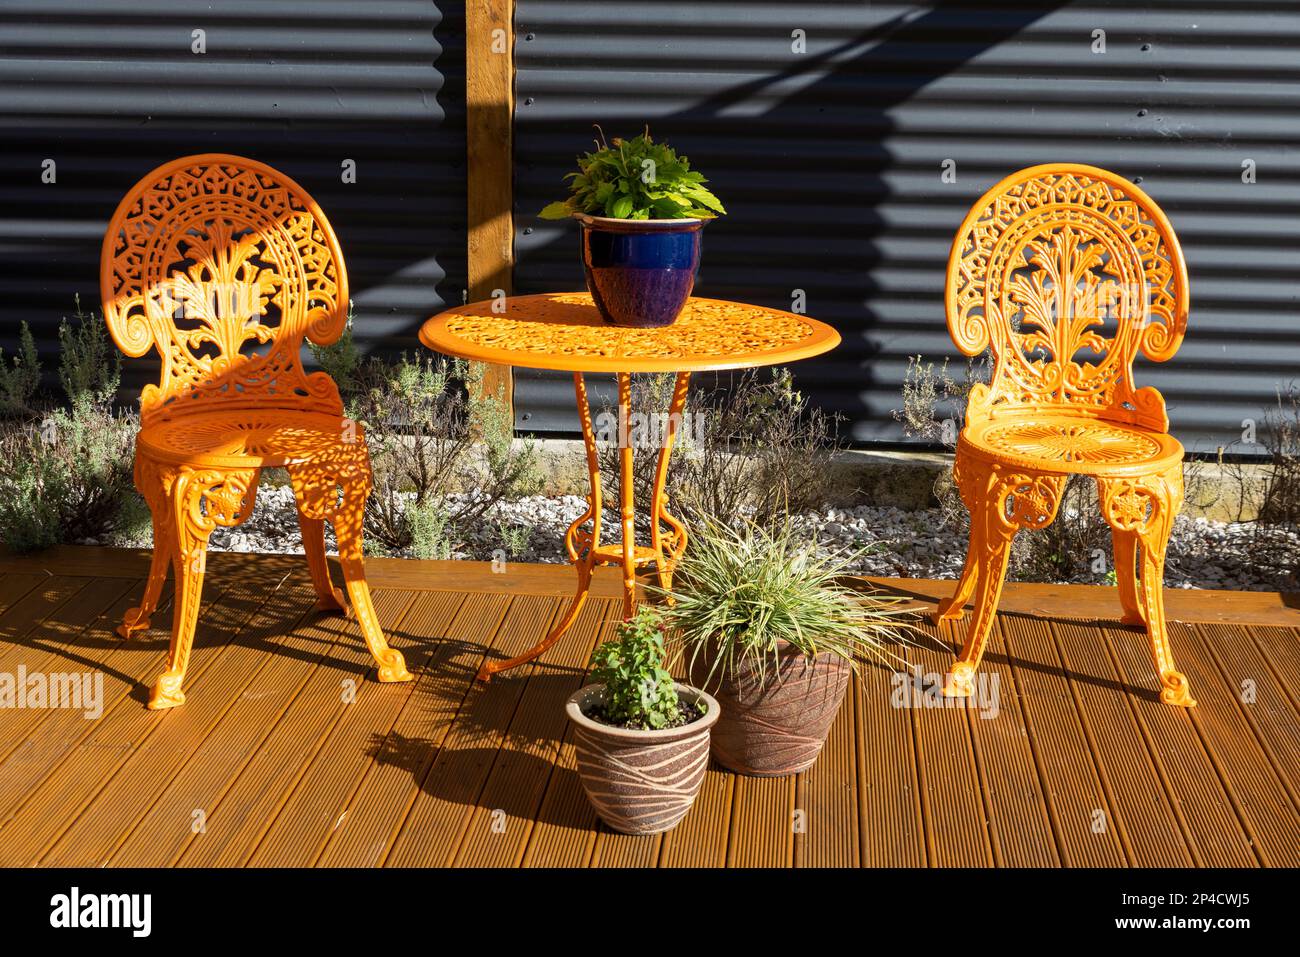 Pretty, picturesque, authentic garden chairs and table. Tidy garden pot plants. Residential property decking seating area. Bright orange cast iron set Stock Photo